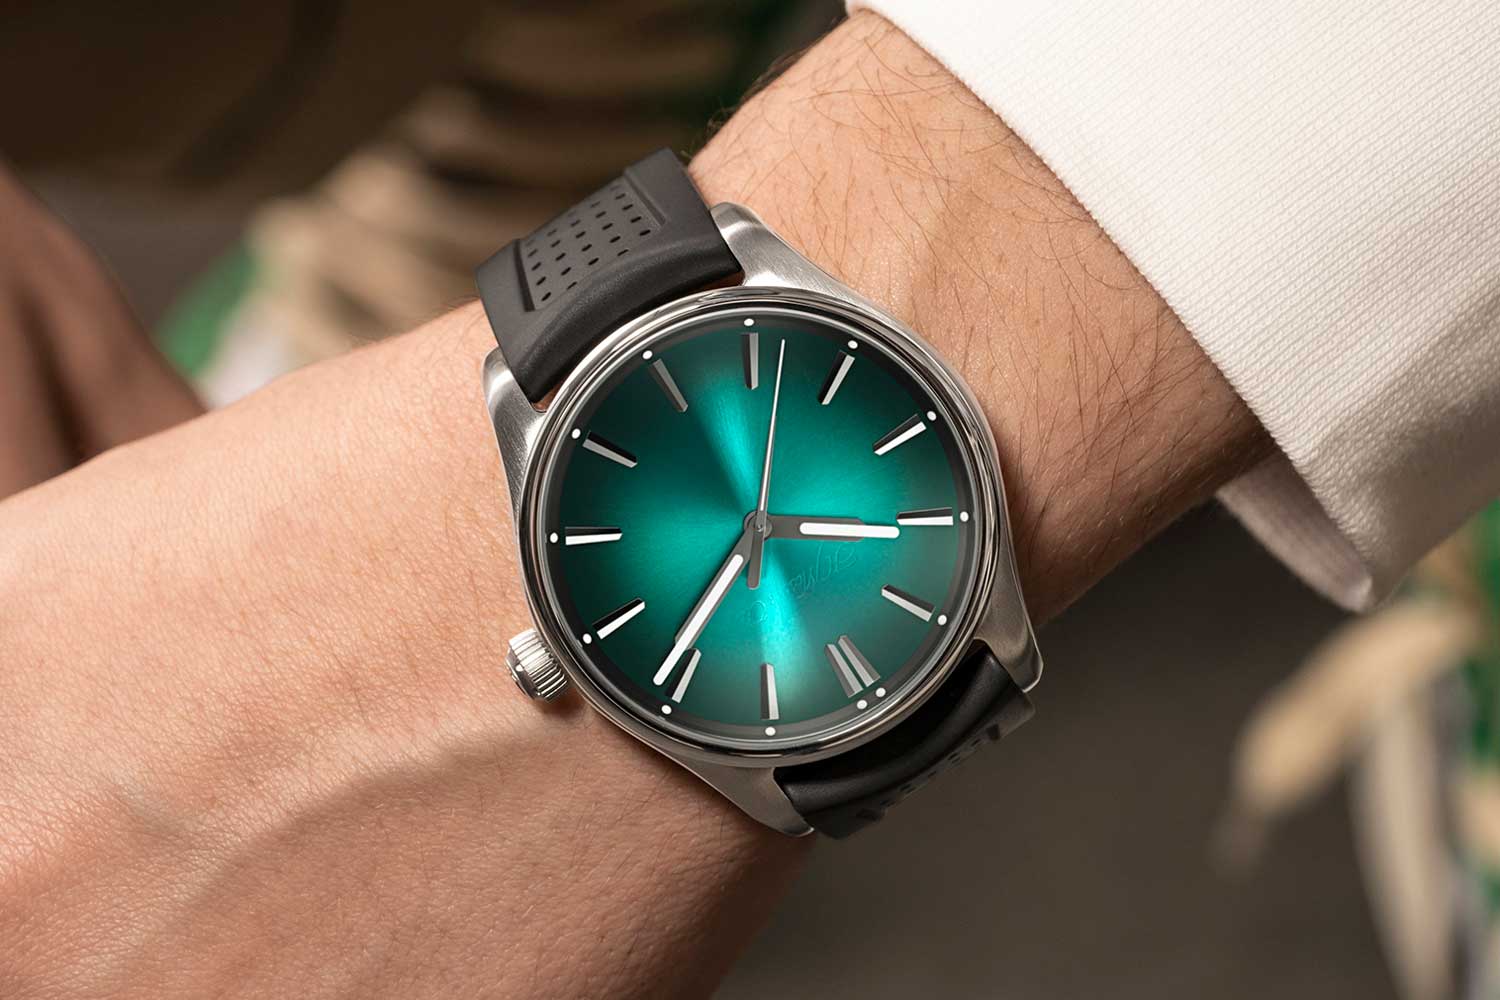 The watch can be paired with a variety of straps - a turquoise Kevlar strap or rubber strap for a casual finish, a steel bracelet or an alligator leather strap for a dressy look.